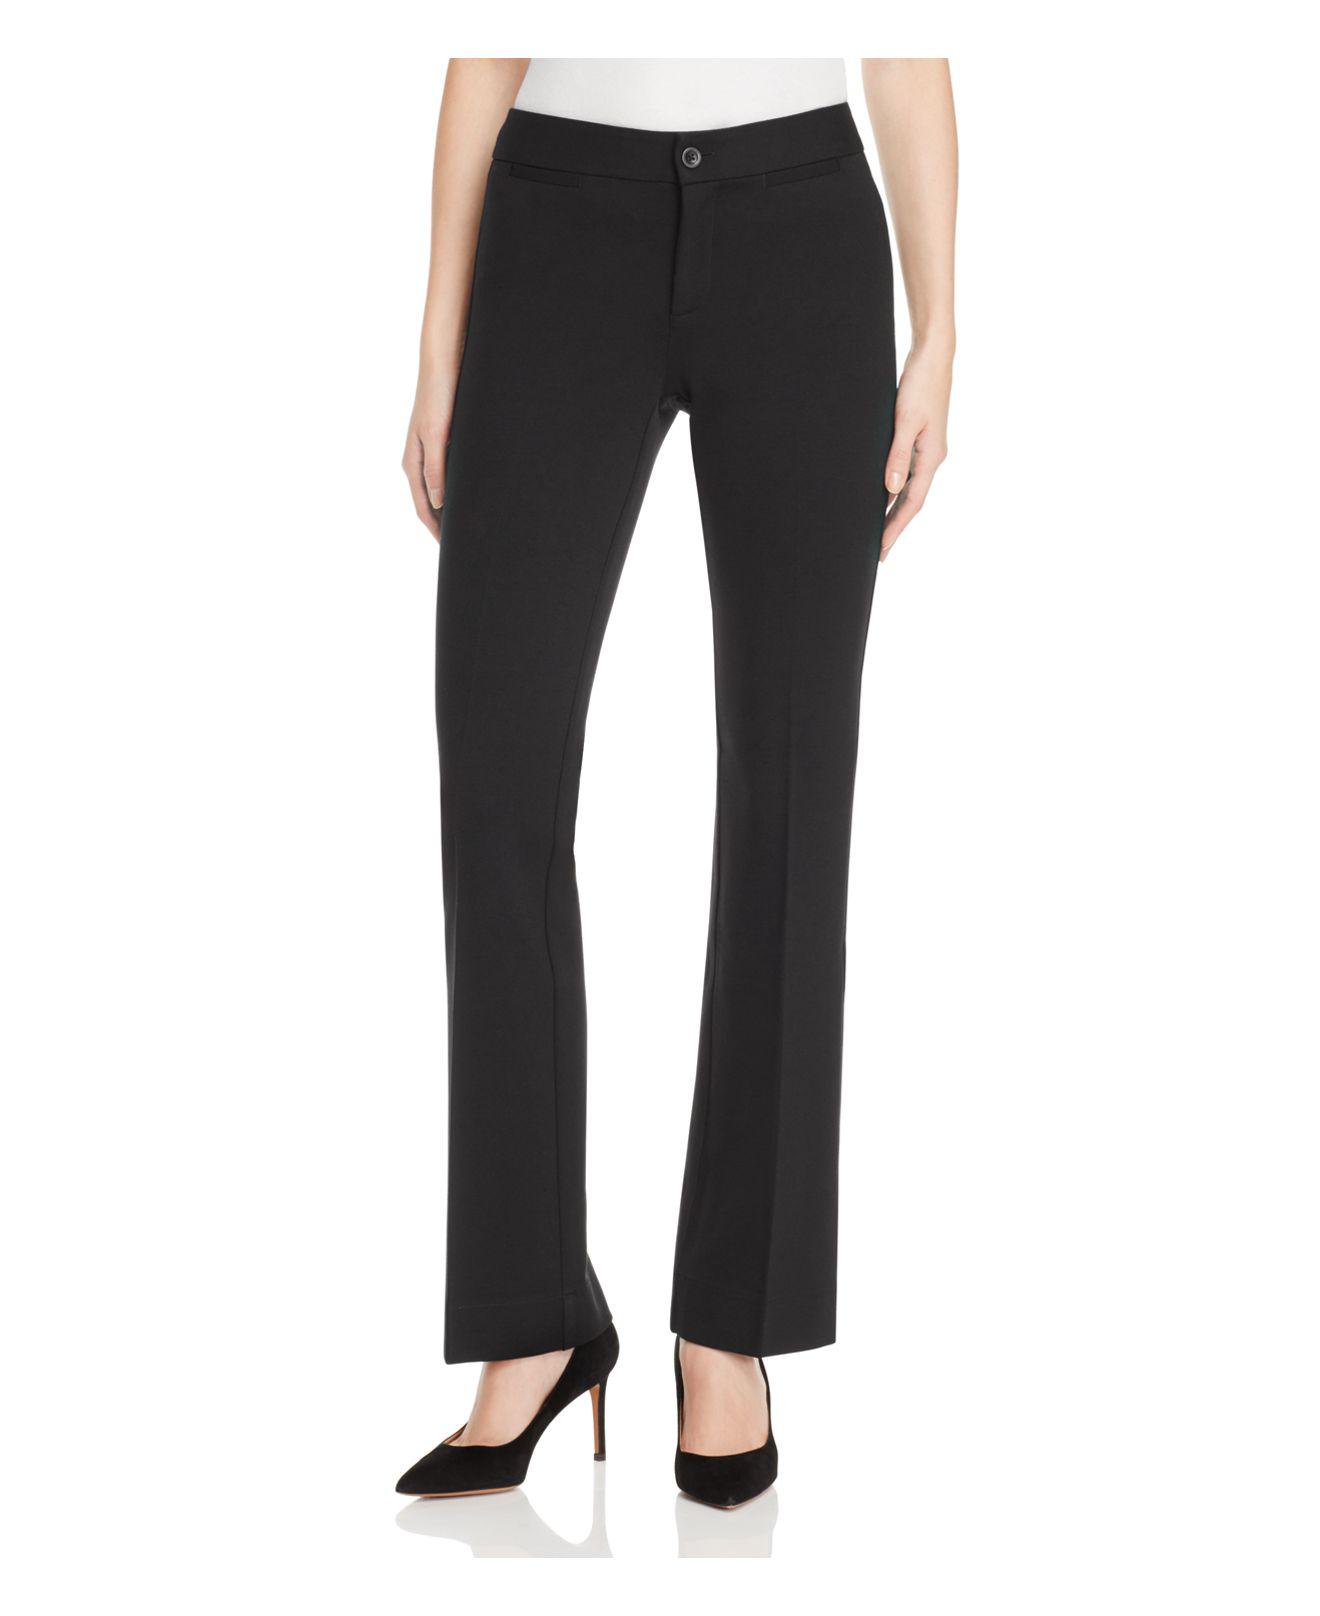 NYDJ Synthetic Michelle Trouser Flare Pants in Black - Lyst